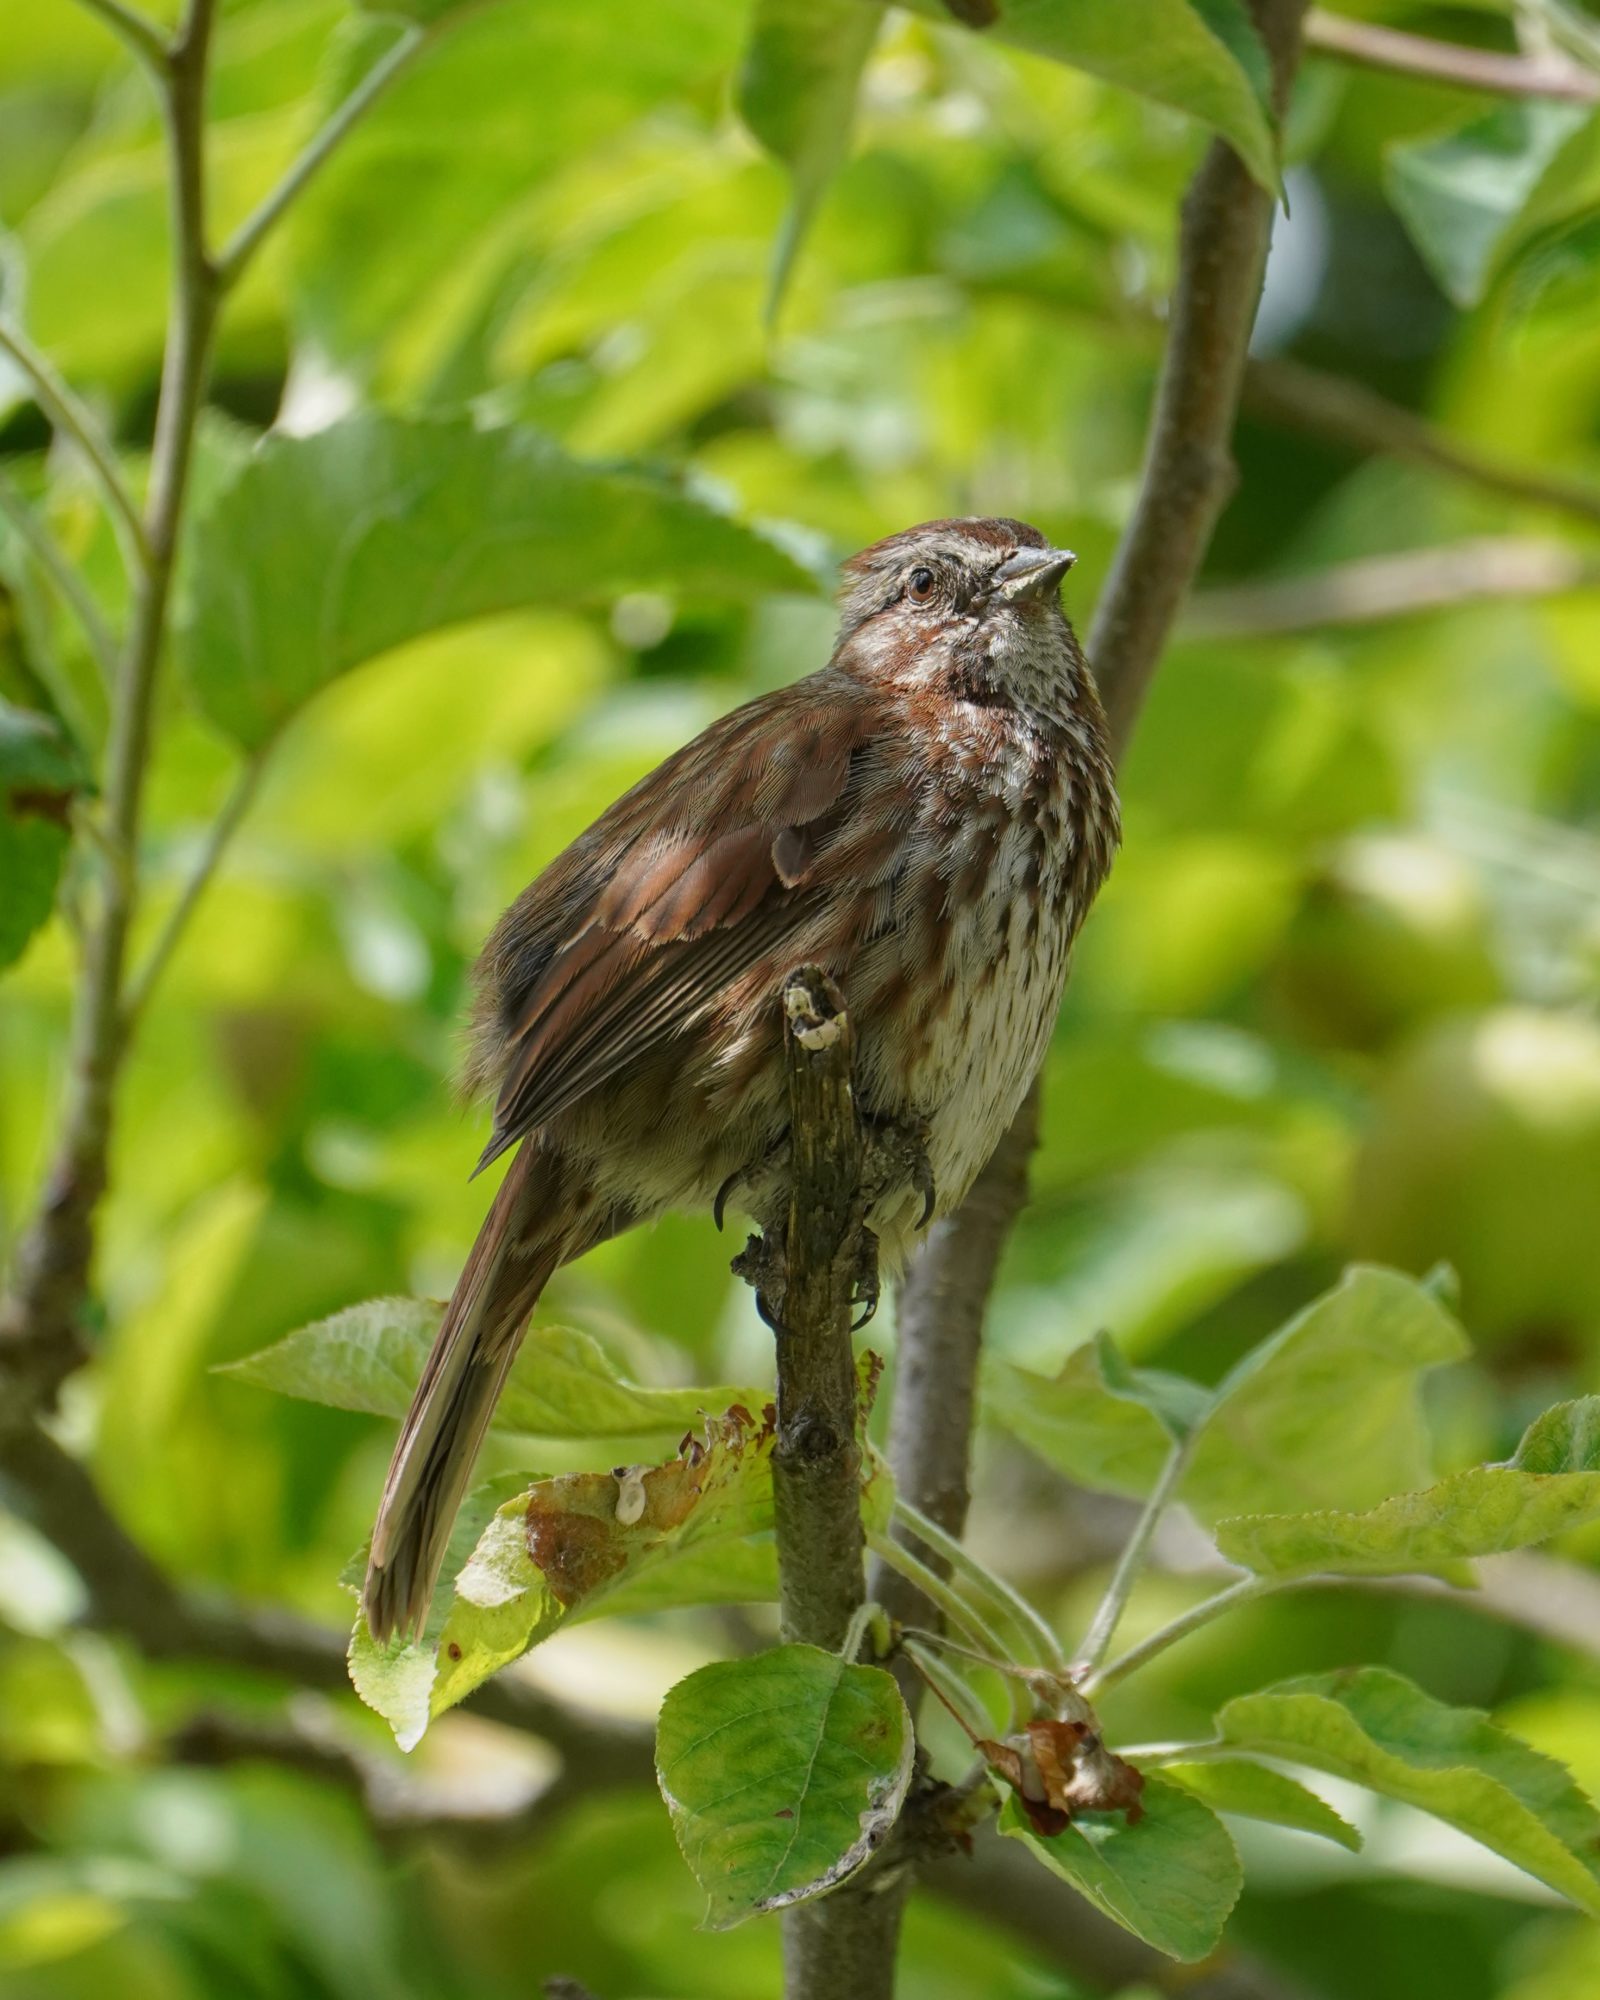 A Song Sparrow up in a tree, looking up, hit by dappled sunlight. The background is green foliage